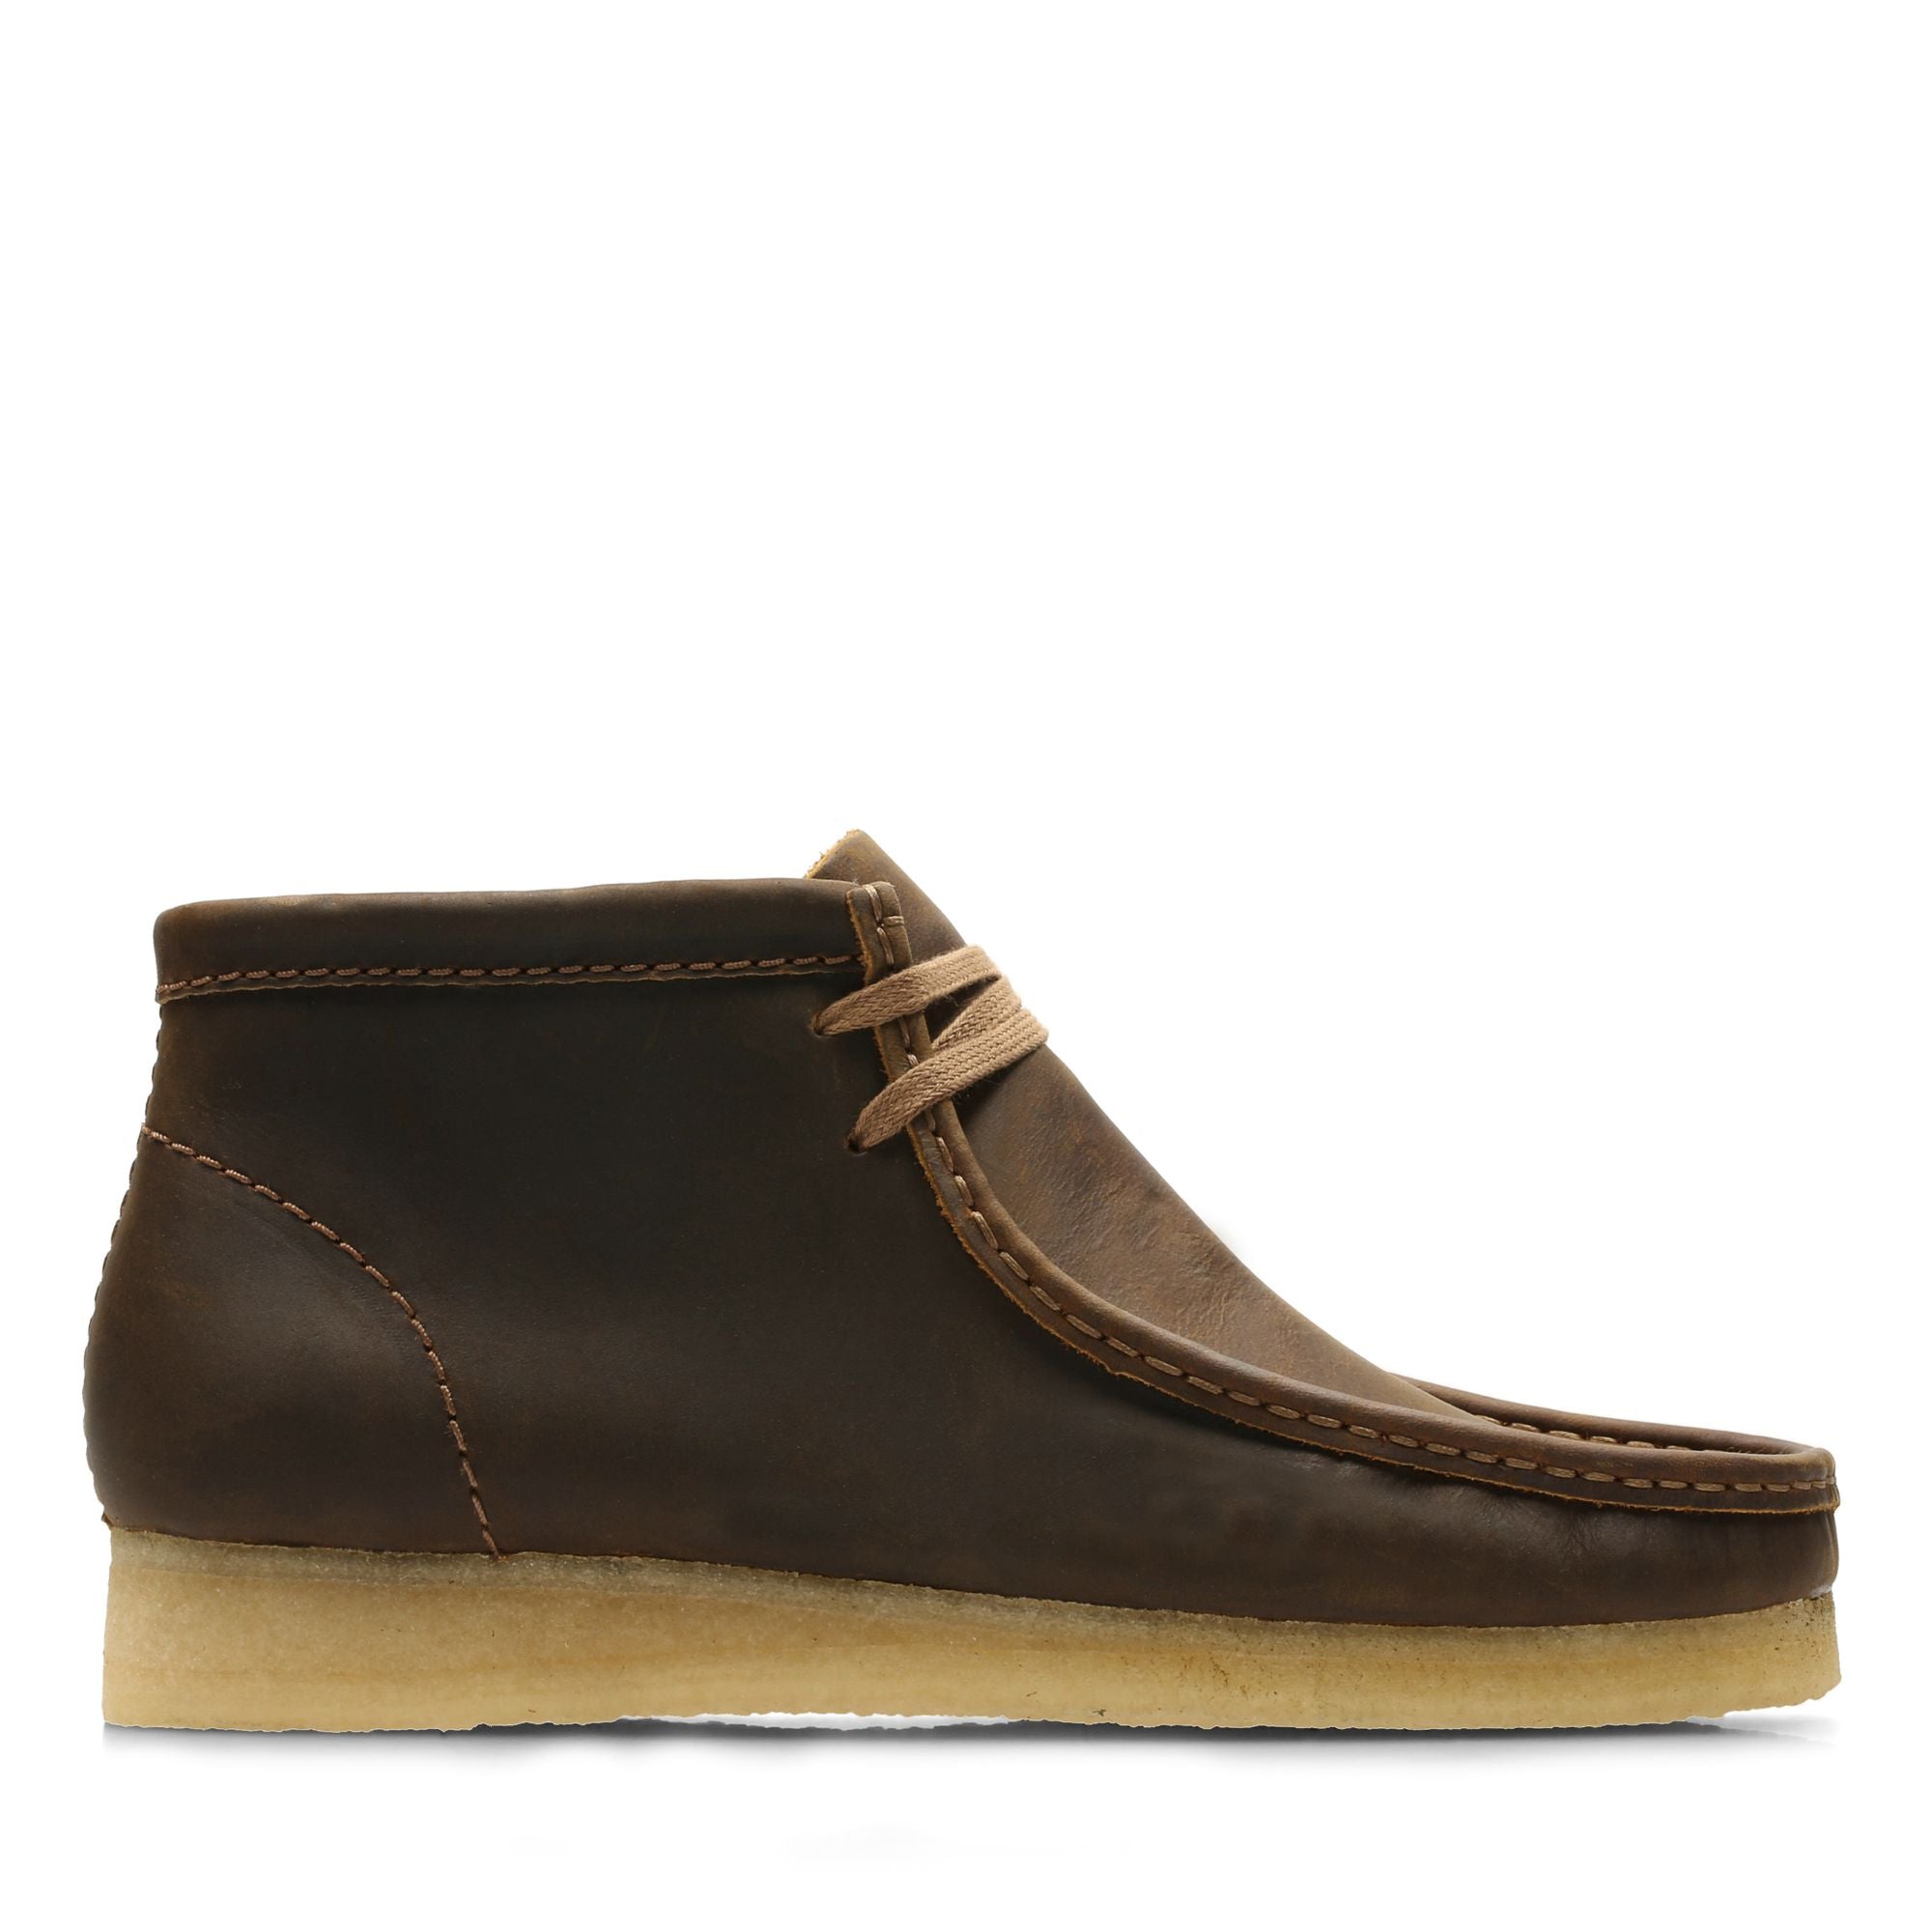 CLARKS WALLABEE HI - BEESWAX – Lazarus of Moultrie